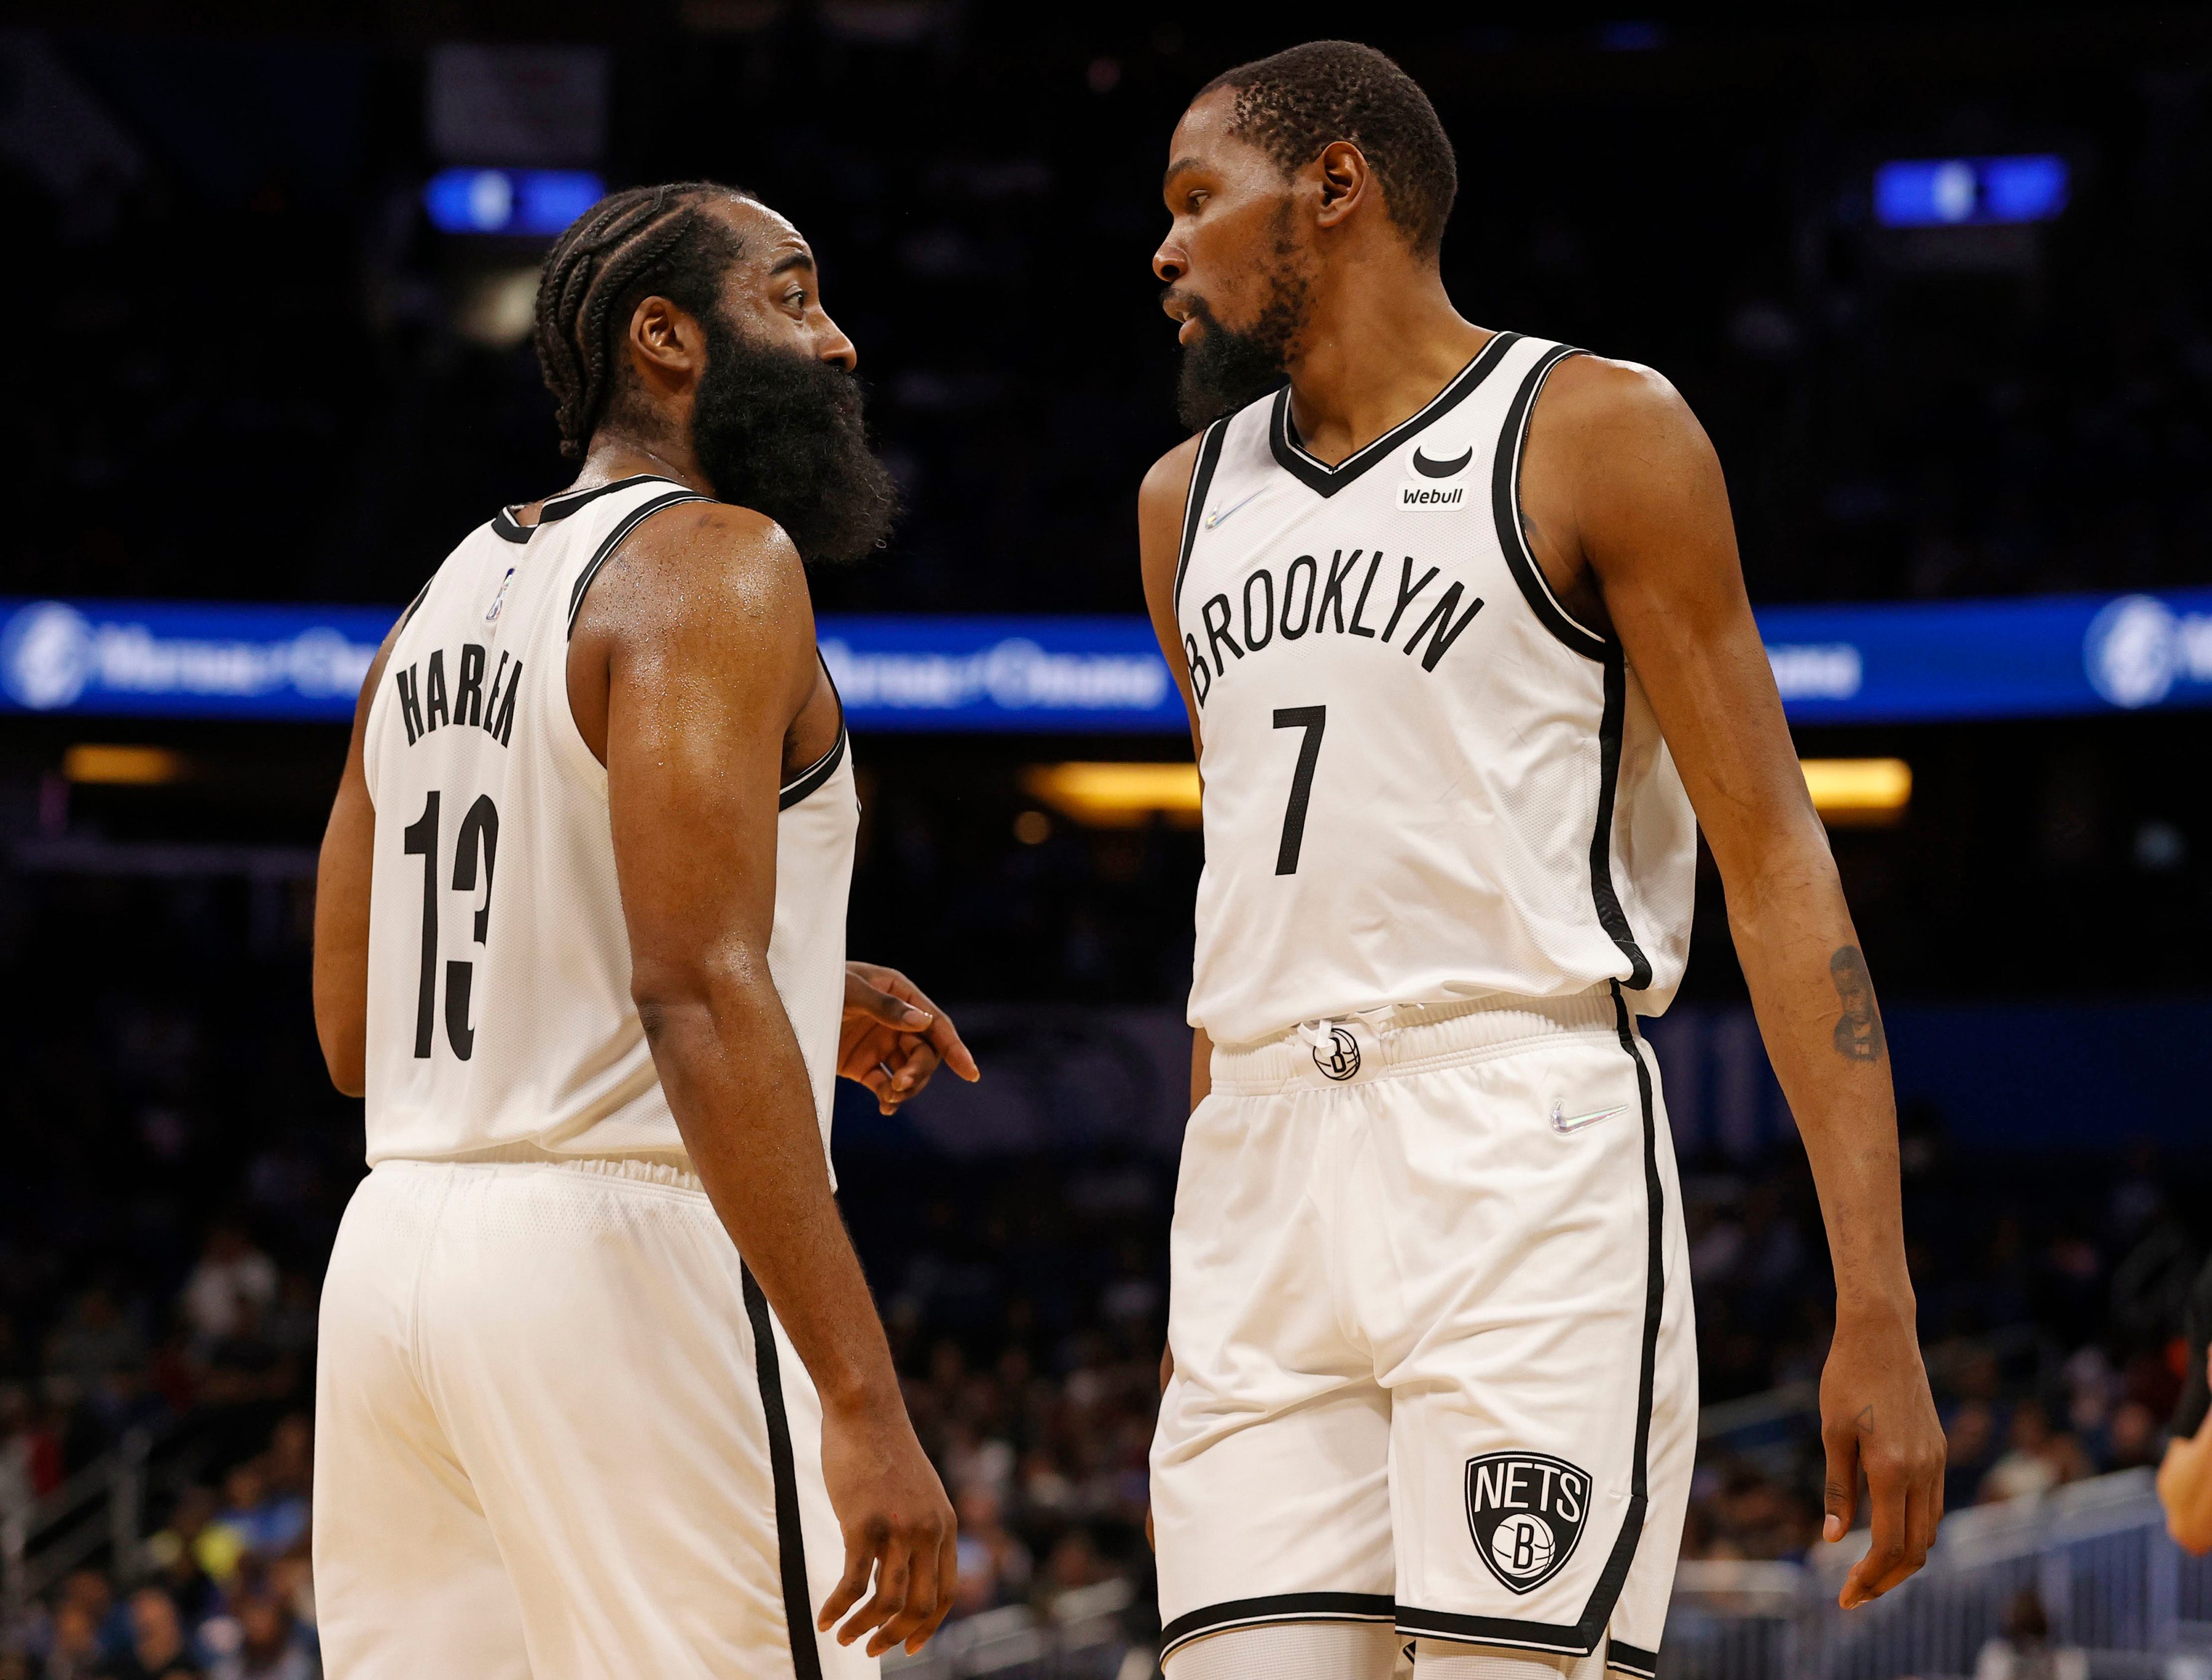 Kevin Durant scores season-high 42 points, James Harden gets triple-double  in debut as Nets clip Magic